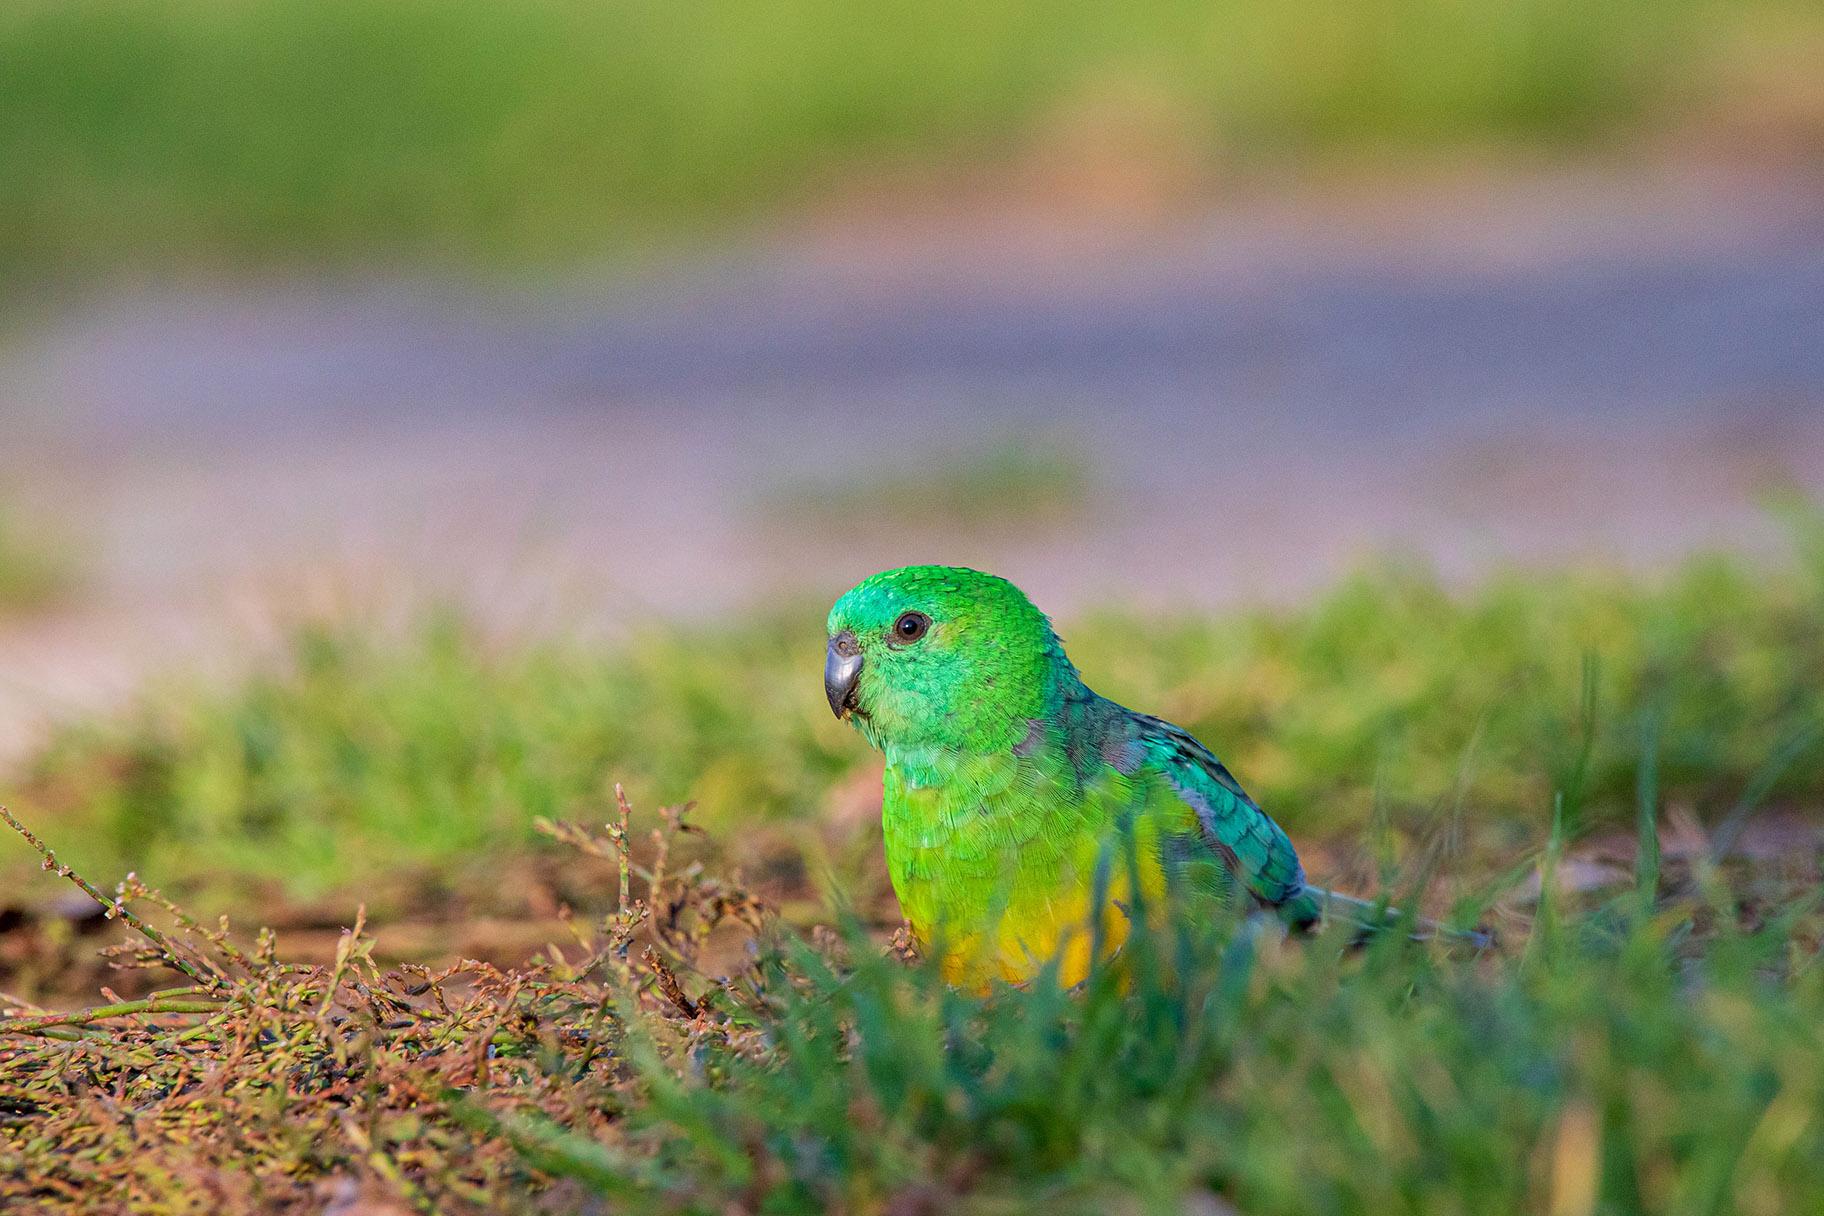 A red-rumped parrot, one of the bird species that has seen its bill size increase. (Credit: Ryan Barnaby)